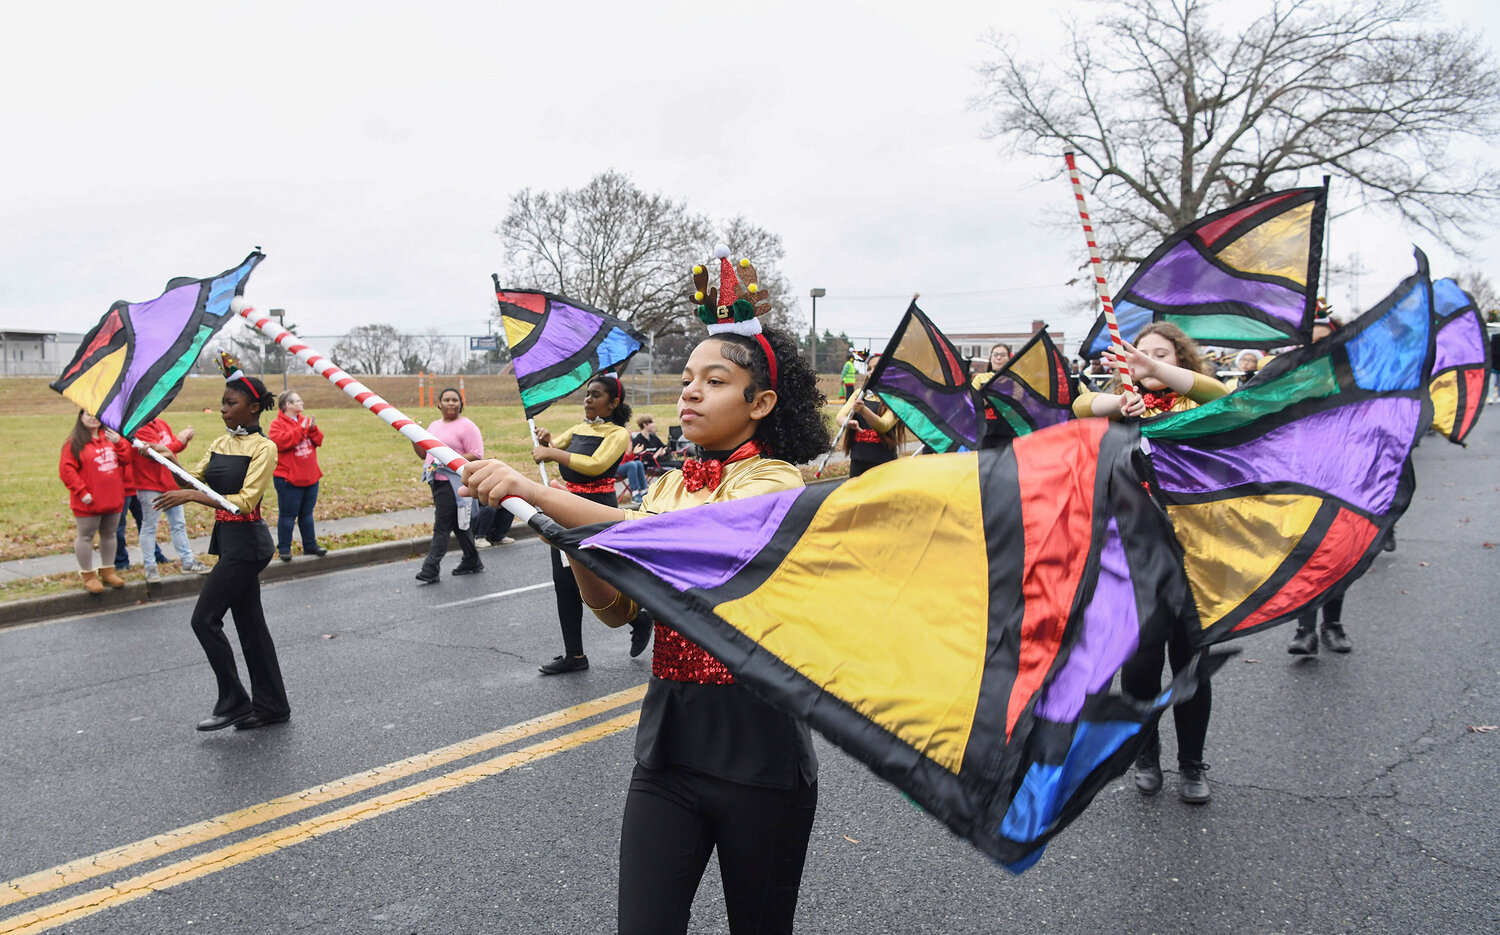 Mcikensi Duah with Wicomico Middle School Band twirls a flag with the rest of the band during the parade.